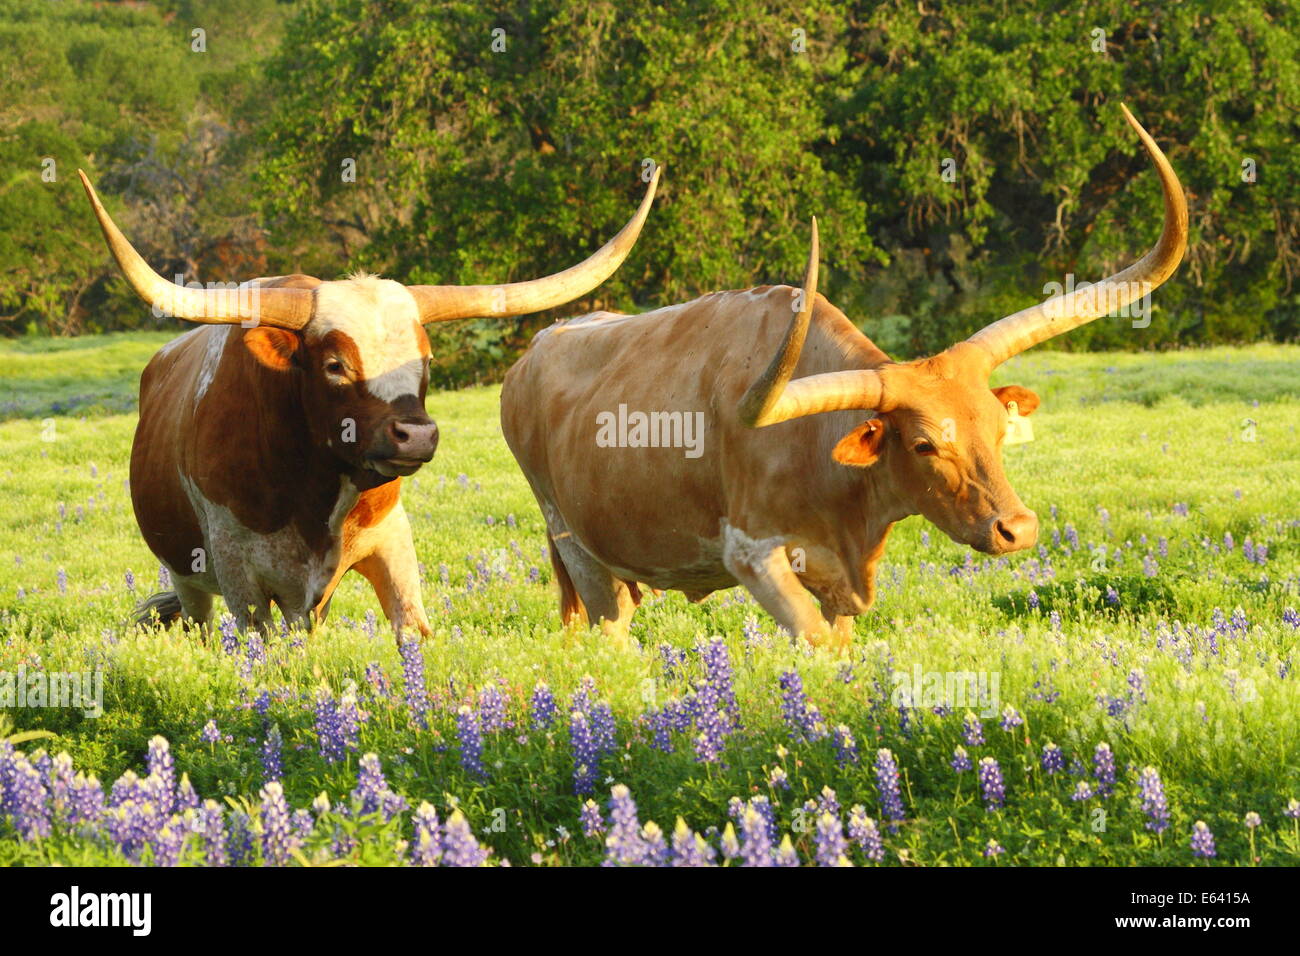 A Texas Longhorn bull courting a longhorn cow among bluebonnets in Spring. Stock Photo